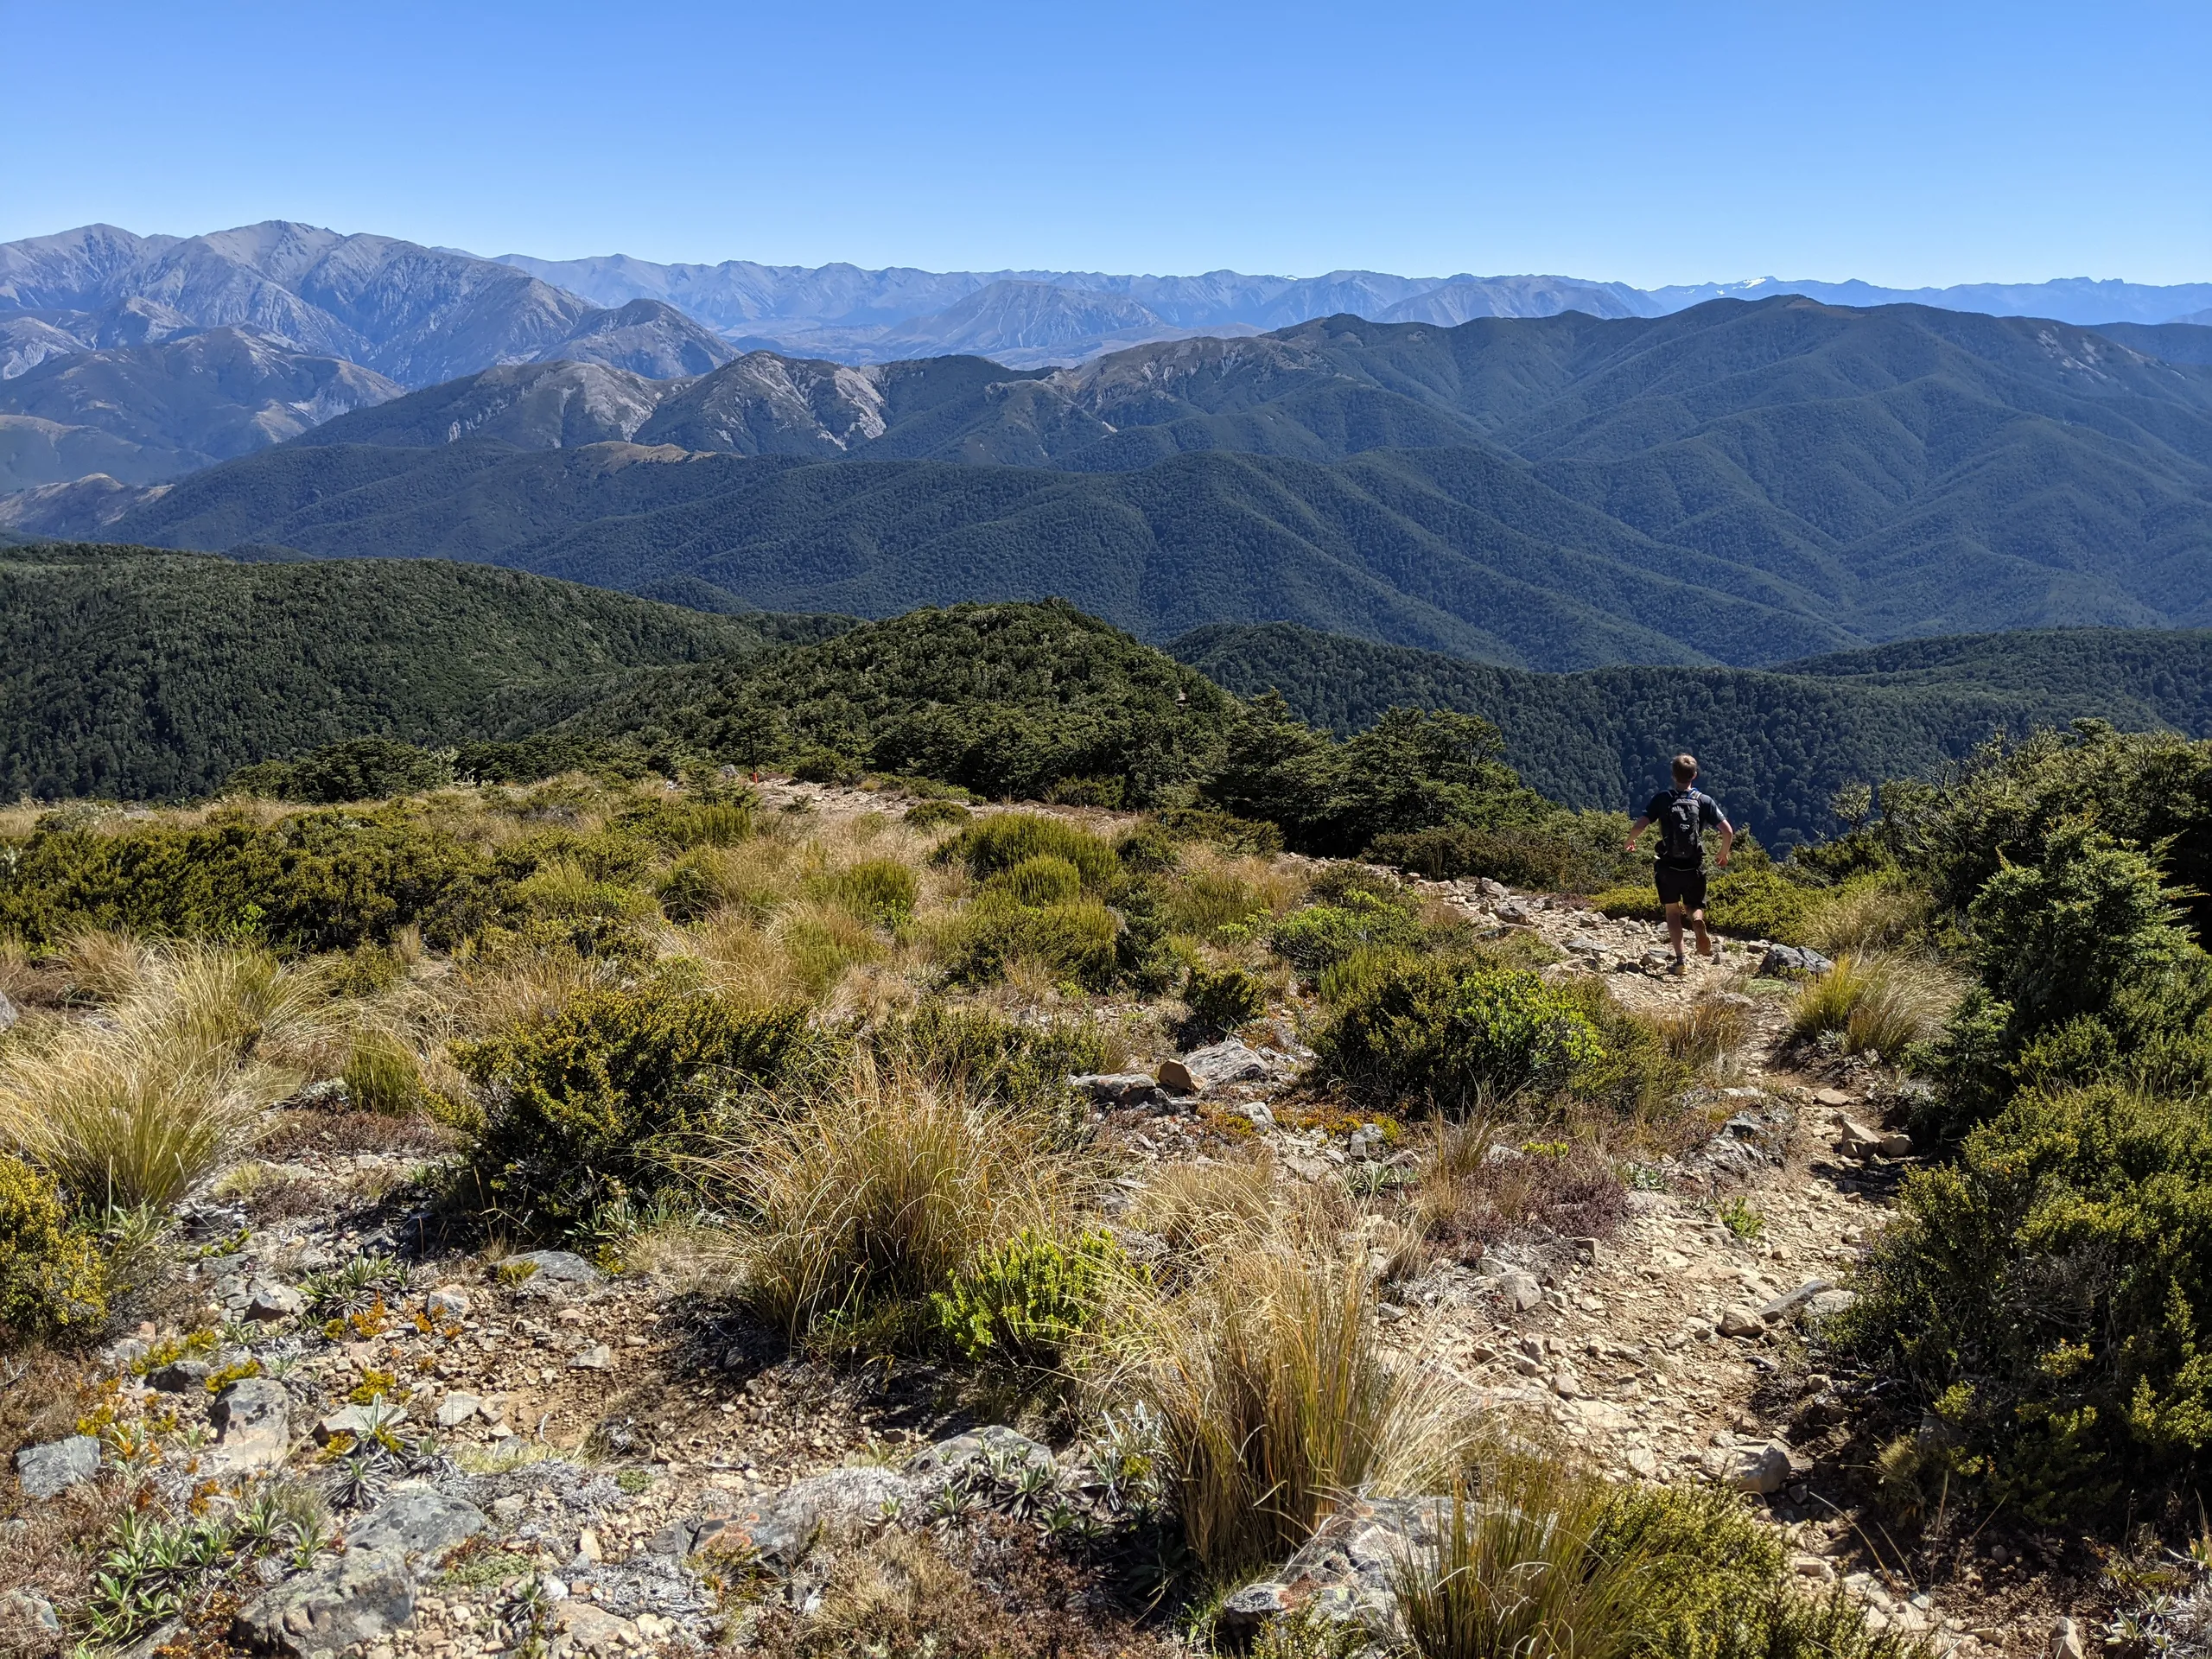 The best part of the run is the tops travel: it's good trail with panoramic views. The descent becomes steeper after dipping below the bushline.